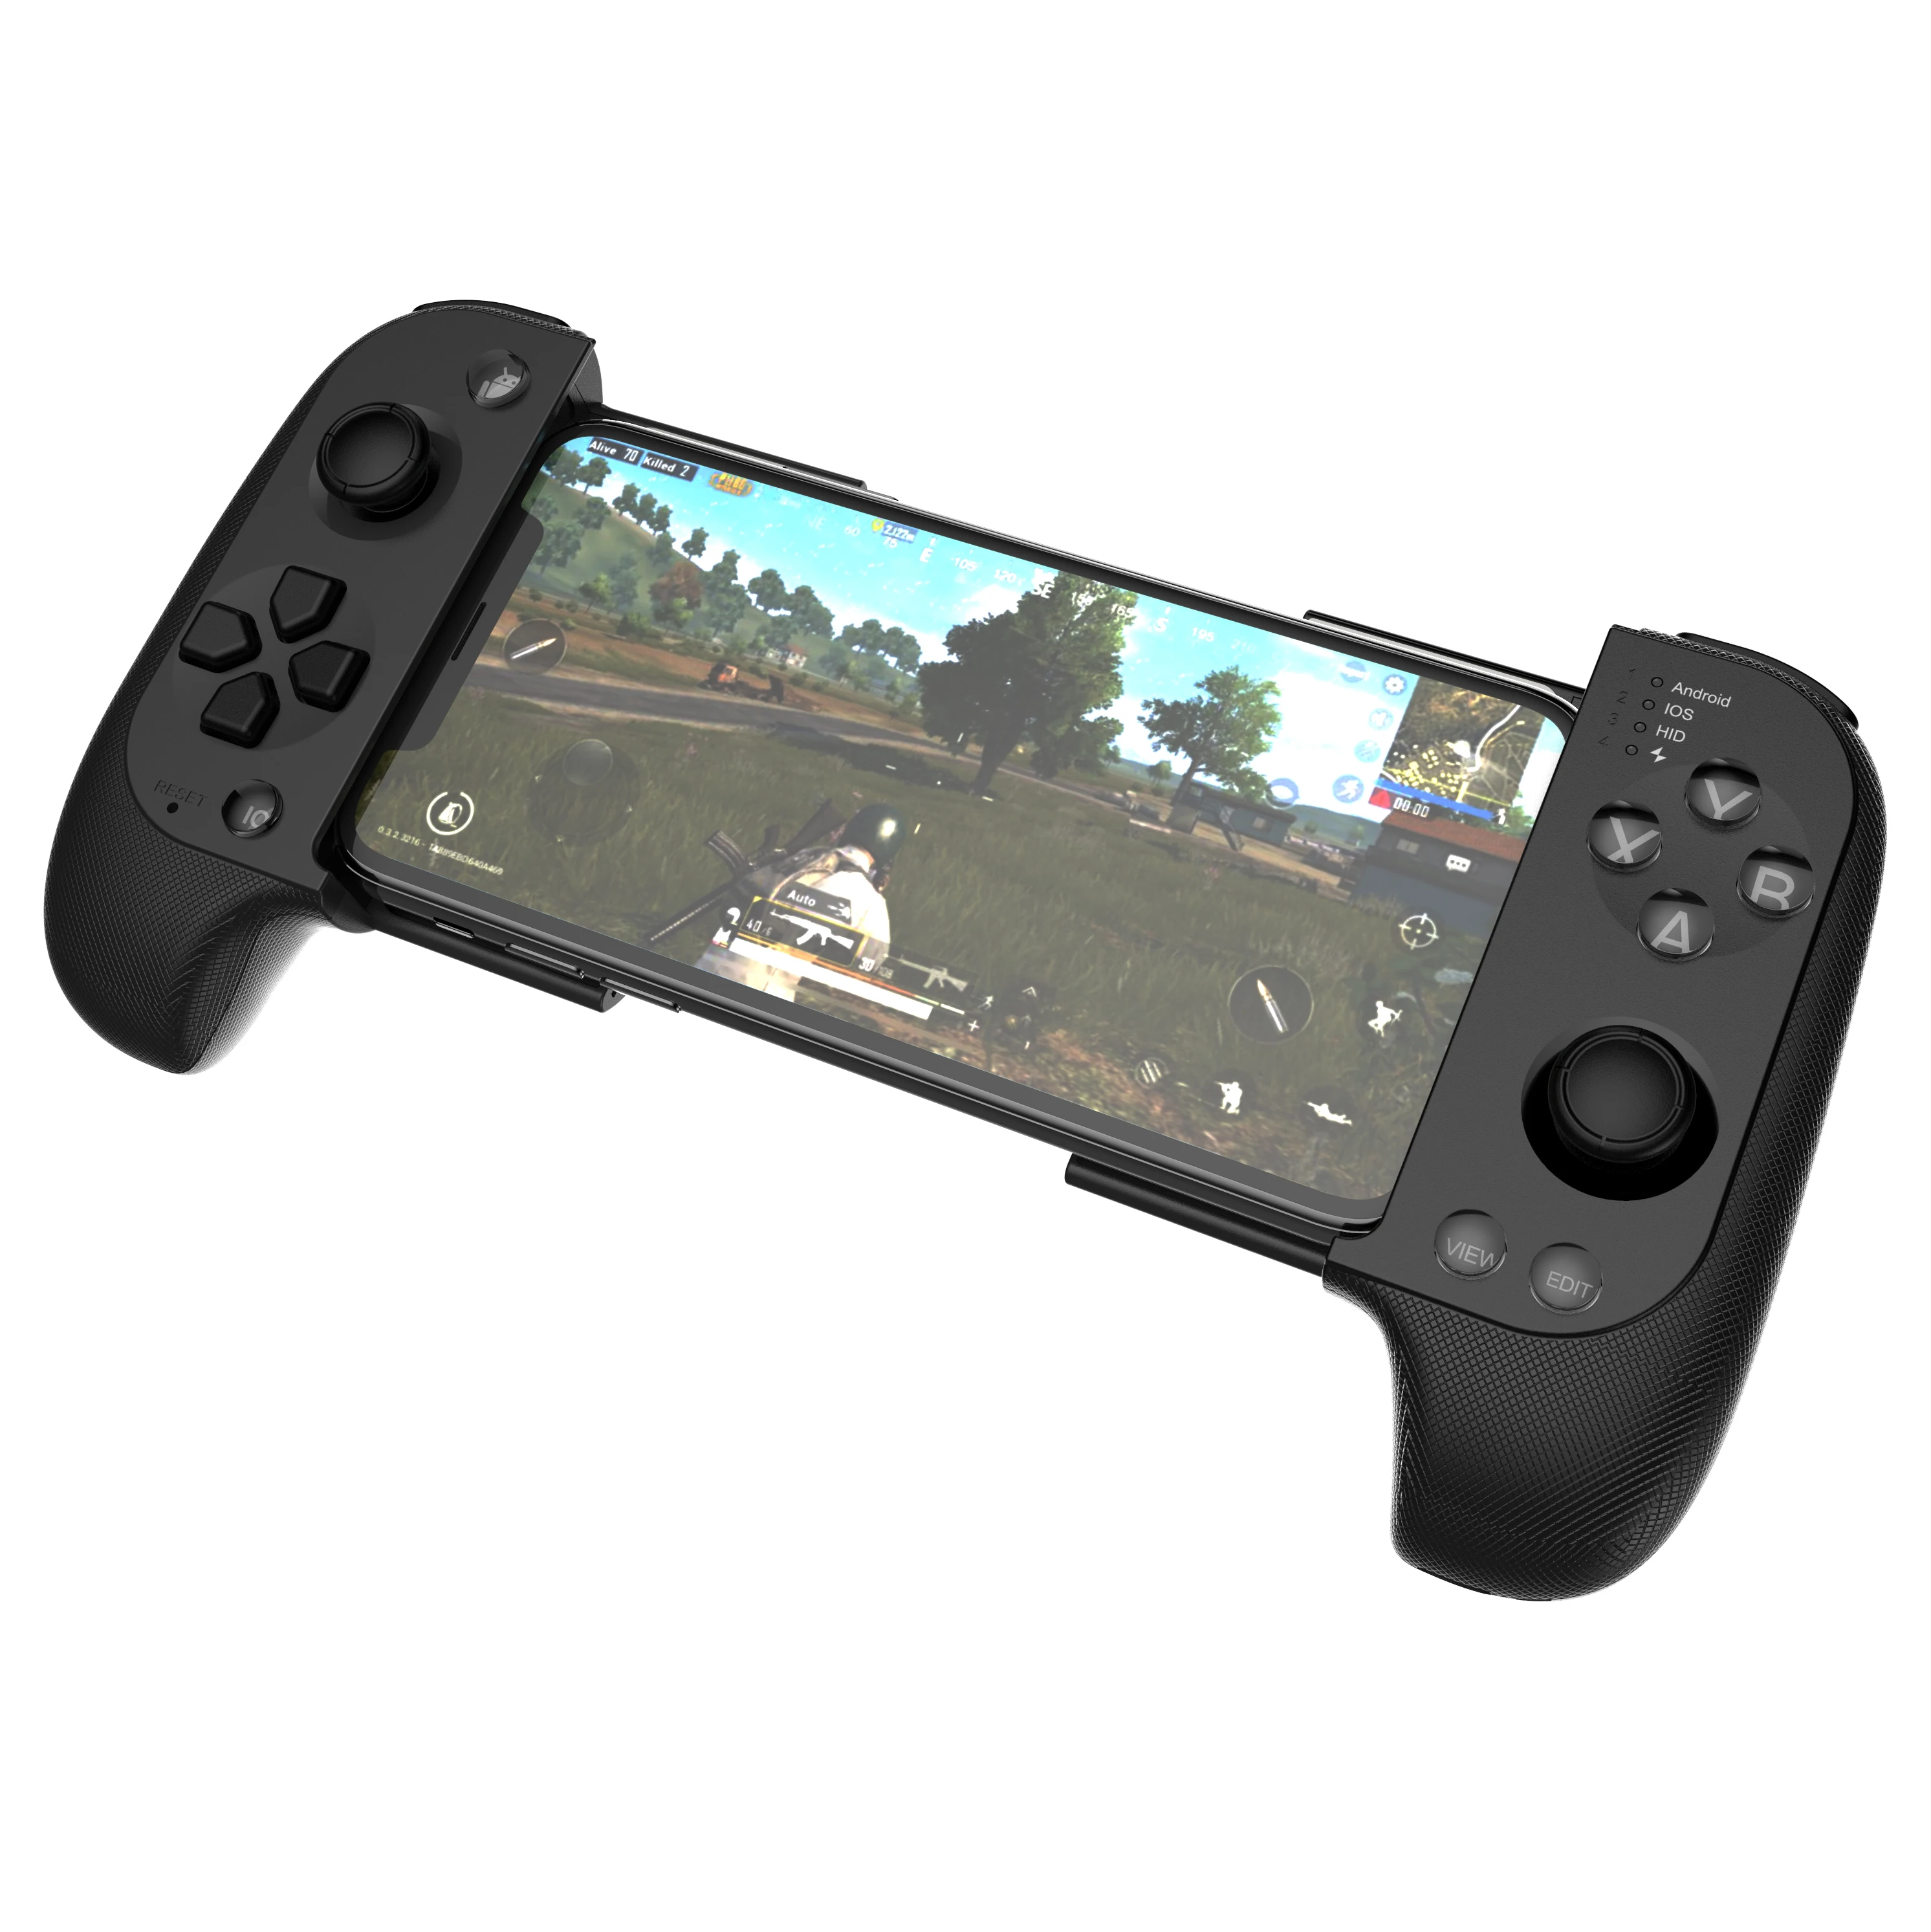 Saitake Brand Bluetooth Wireless Mobile Game Controller Android Gamepad For Pubg Joystick Game Controller Buy For Pubg Mobile Controller For Pubg Mobile Game Controller For Pubg Mobile Gamepad Product On Alibaba Com